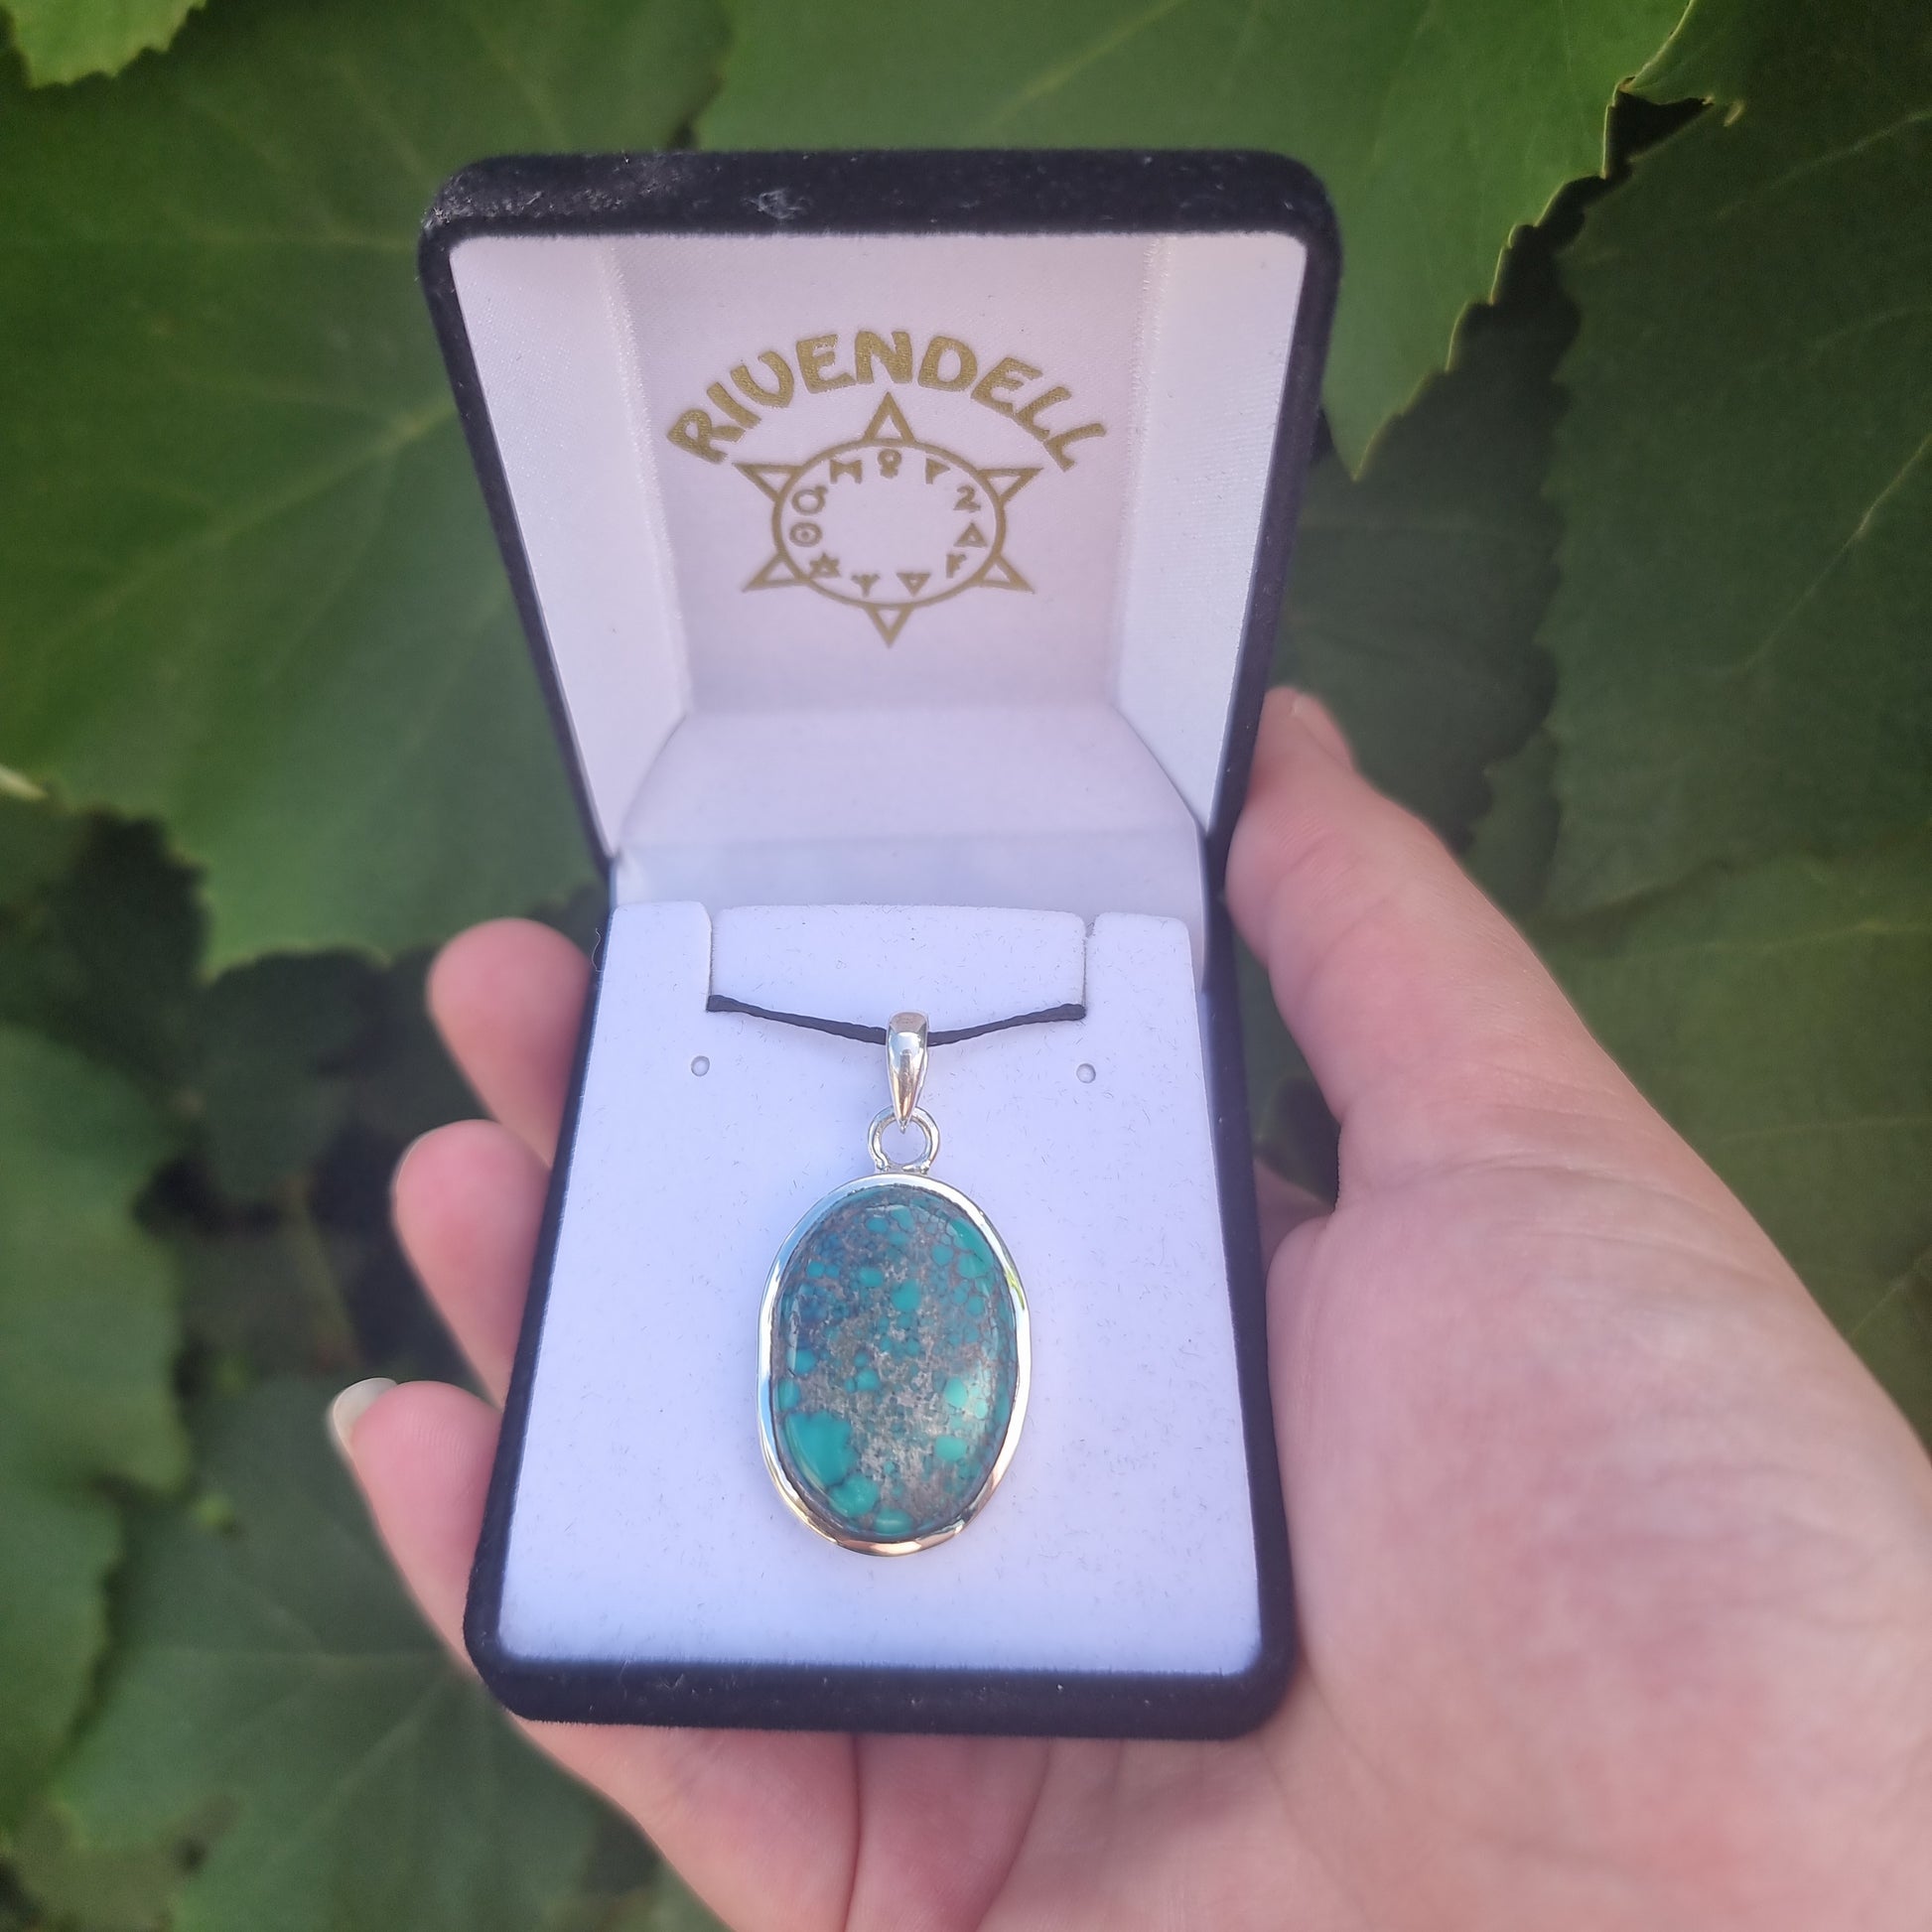 Turquoise pendant collection - Rivendell Shop